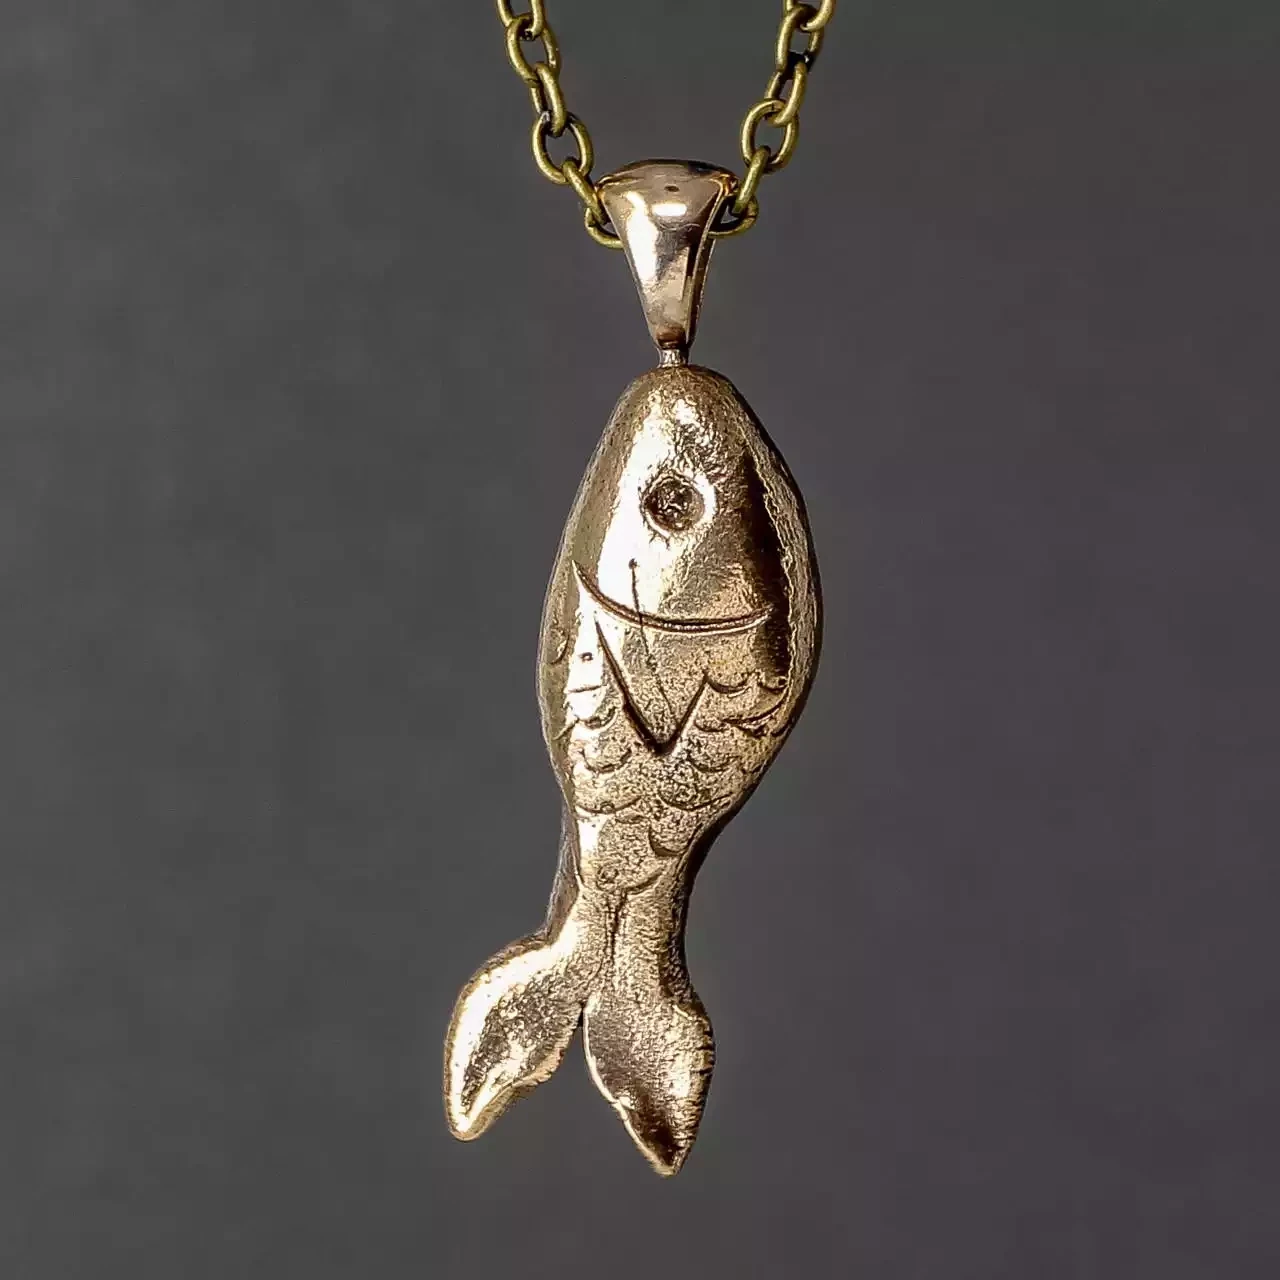 Bronze Fishy Necklace by Xuella Arnold